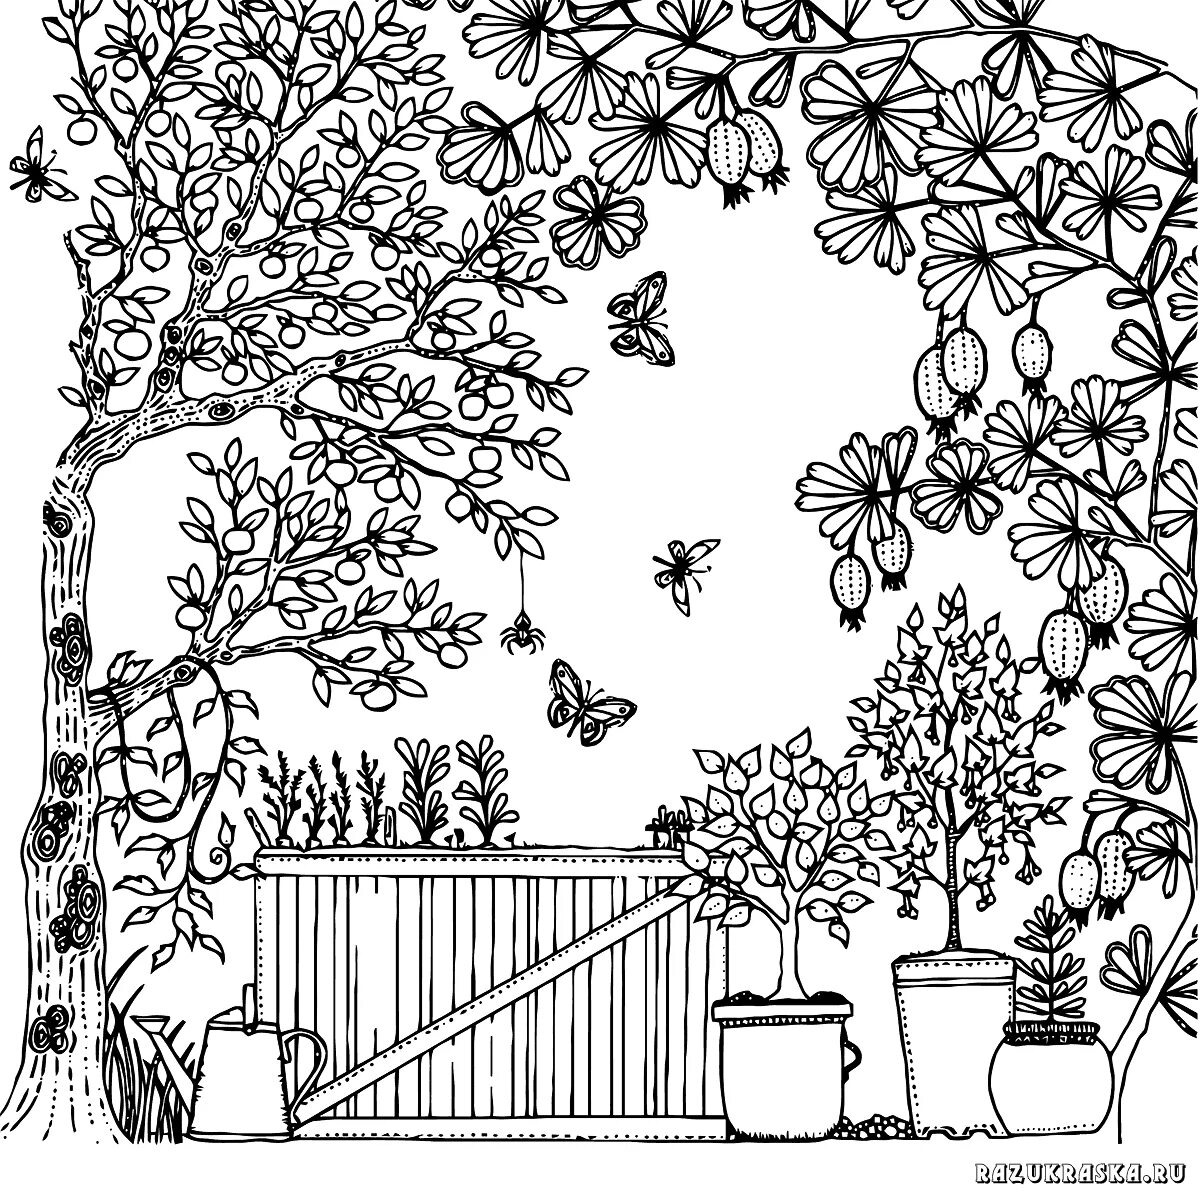 Fancy garden coloring pages for kids